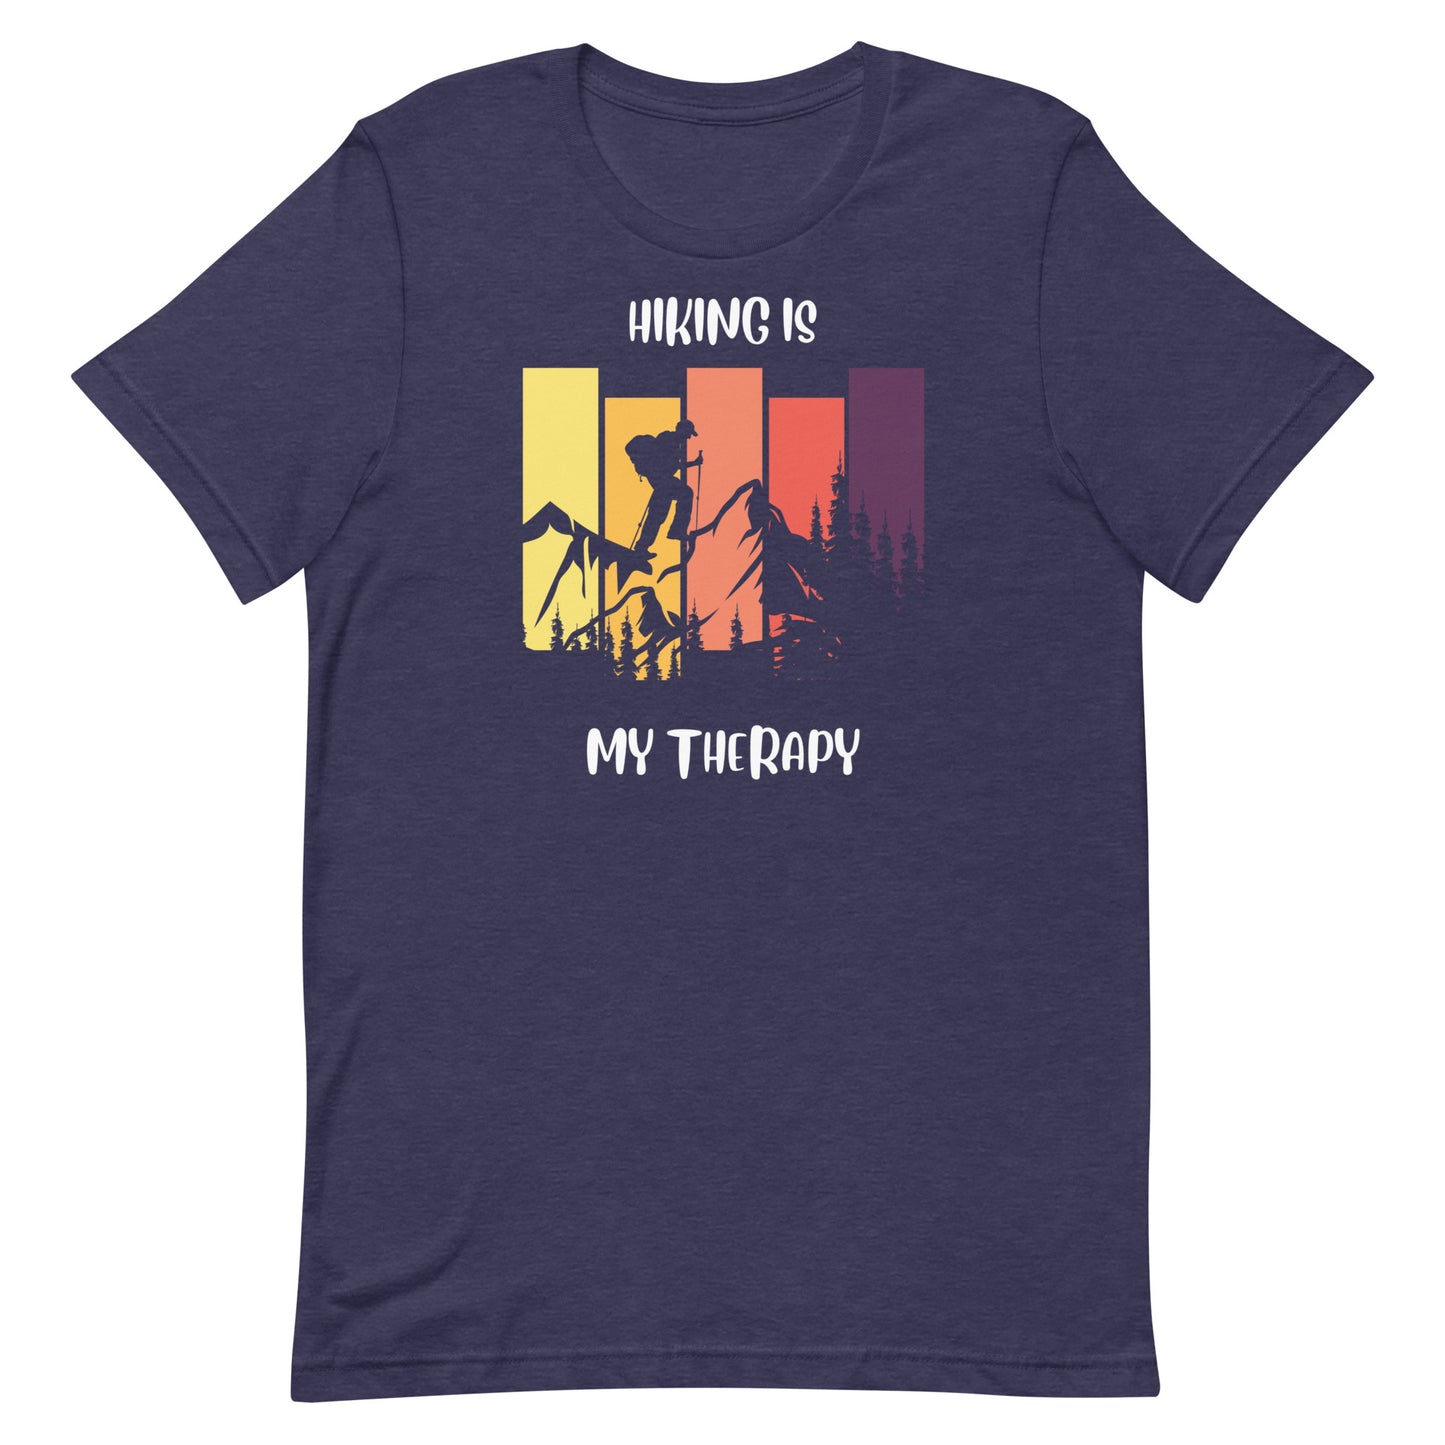 Hiking is my therapy - Unisex t-shirt